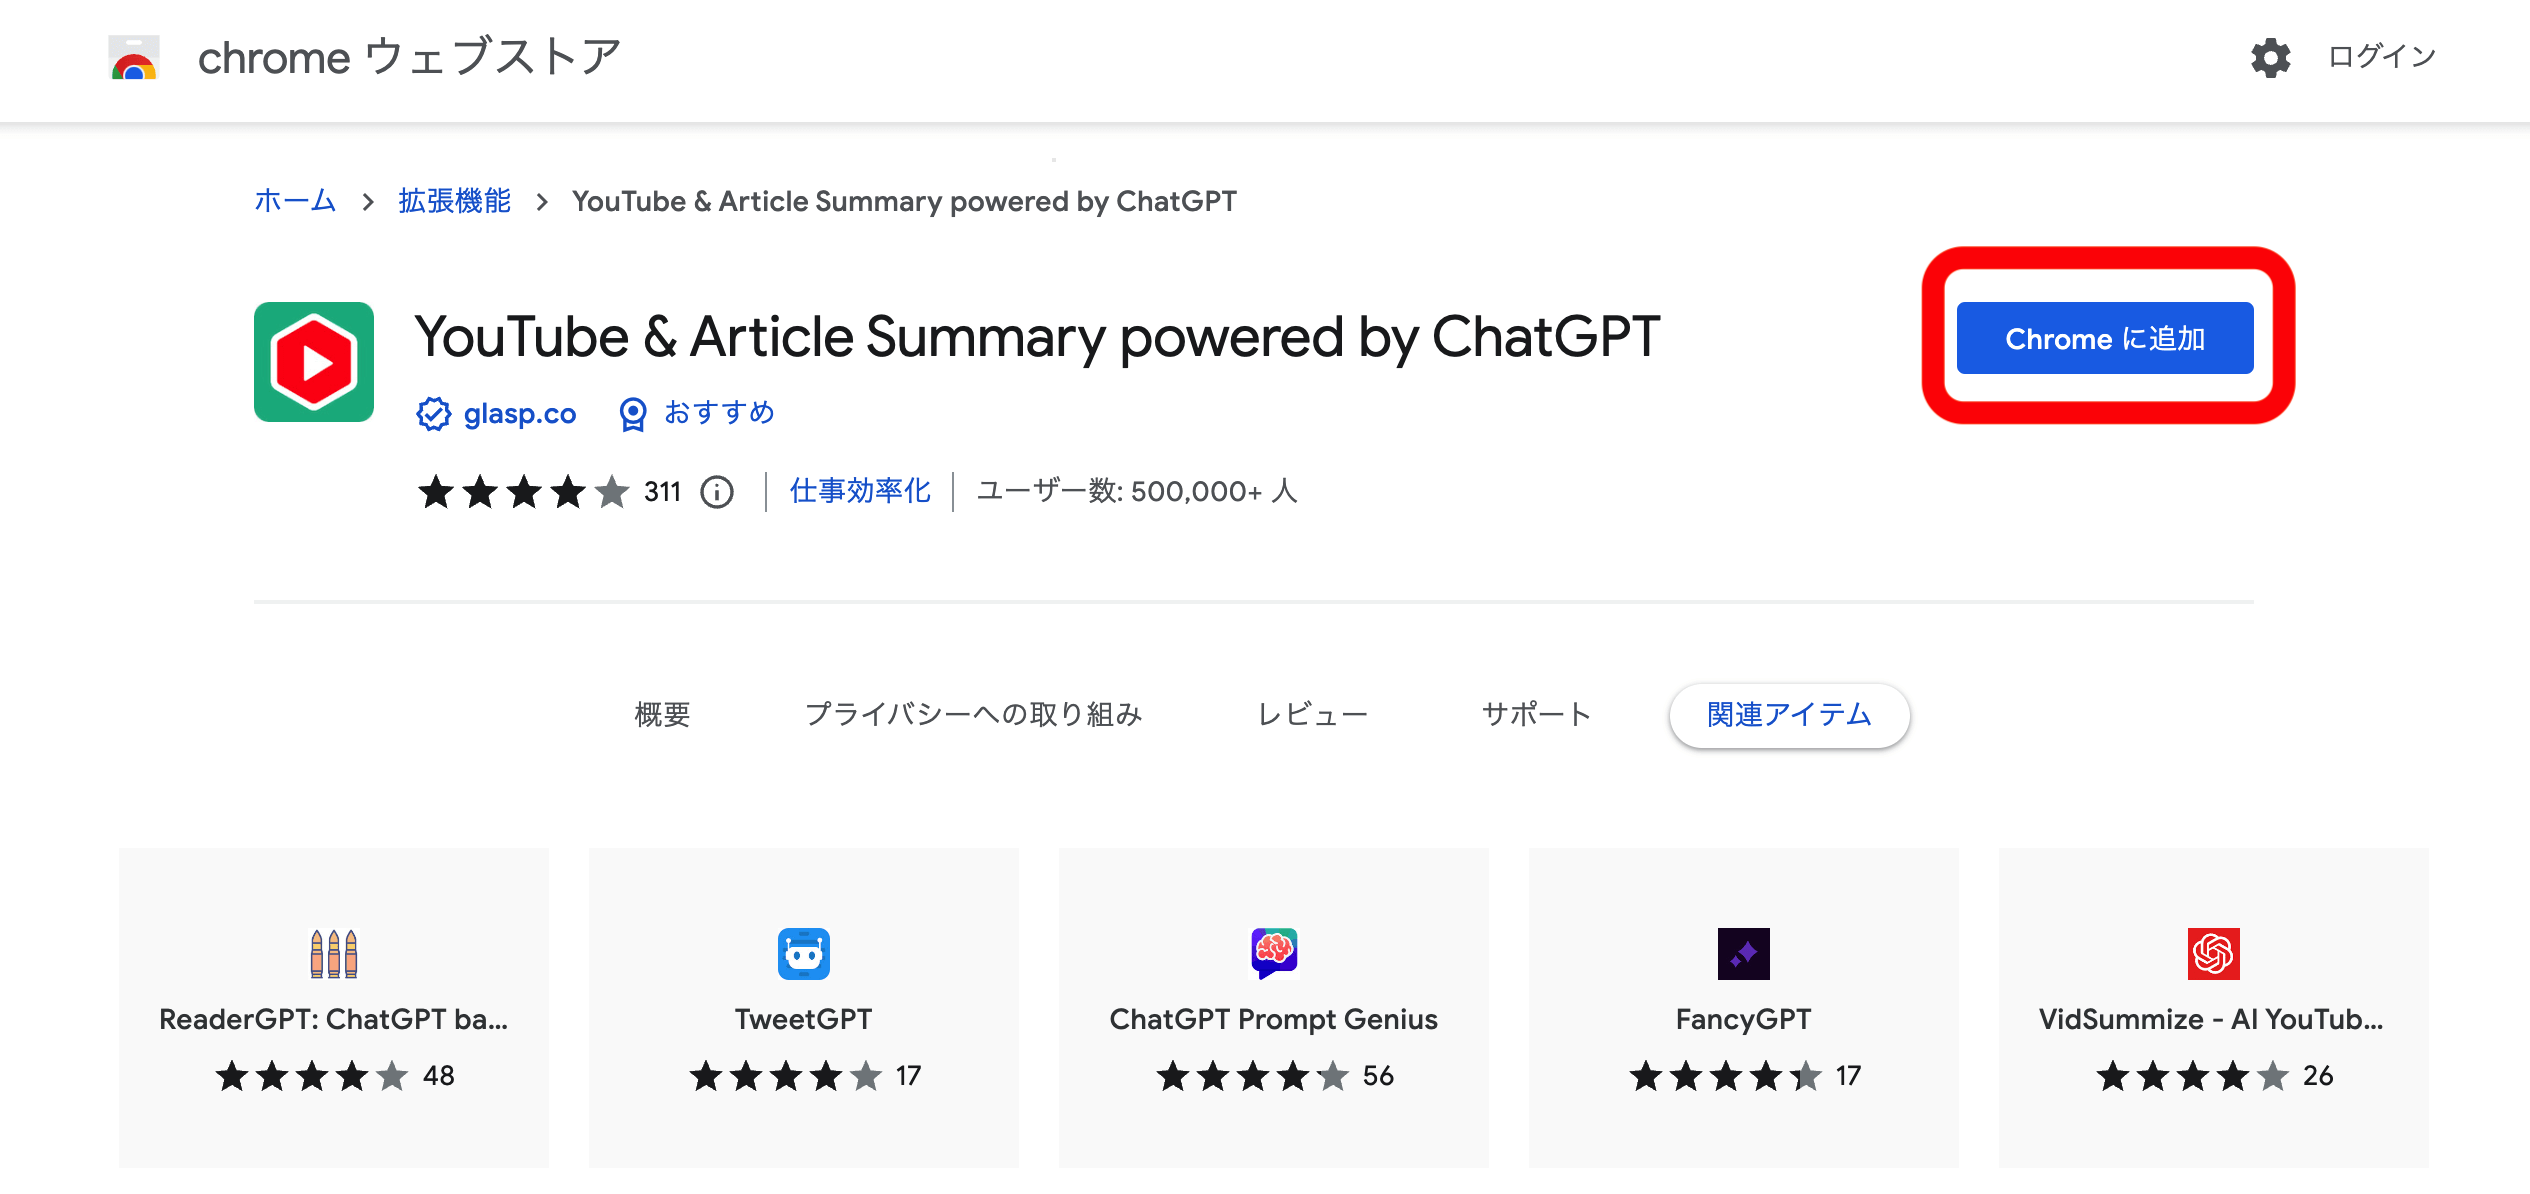 YouTube & Article Summary powered by ChatGPT